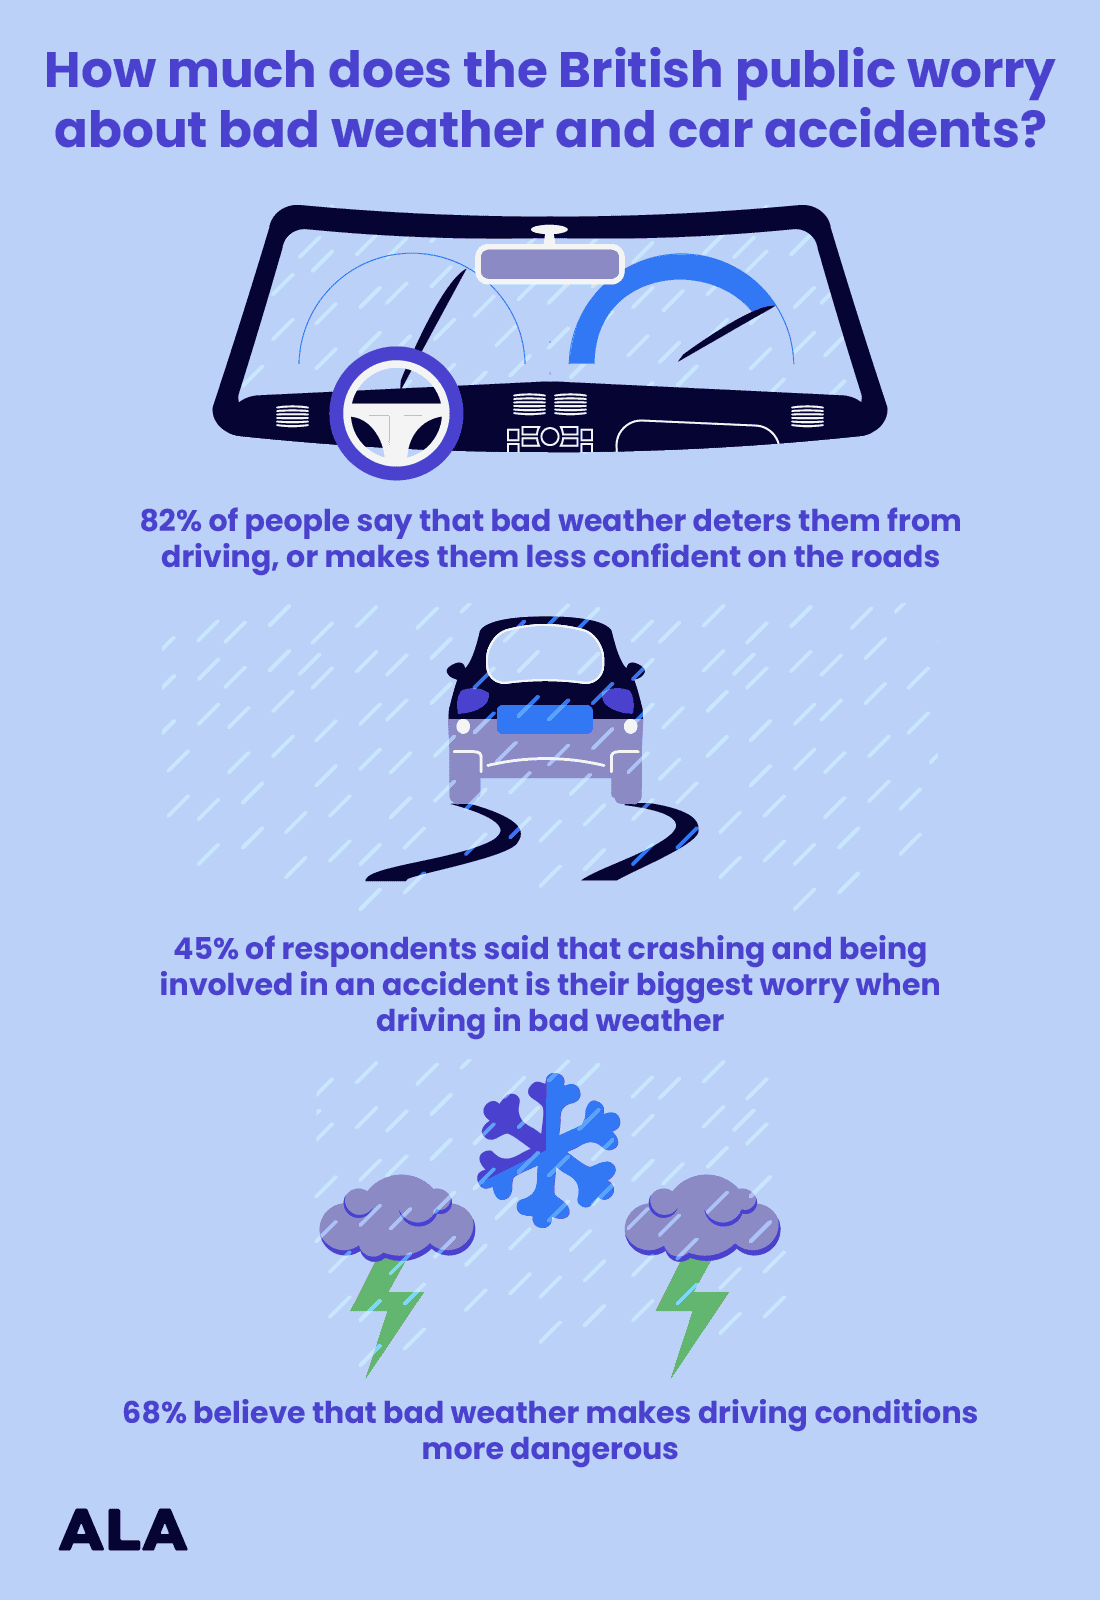 Ala Inforgraphic explaining the statistics of bad weather. 82% of people say bad weather deters them from driving. 45% of people said crashing is their biggest worry during bad weather. 68% of people believe bad weather makes driving more dangerous